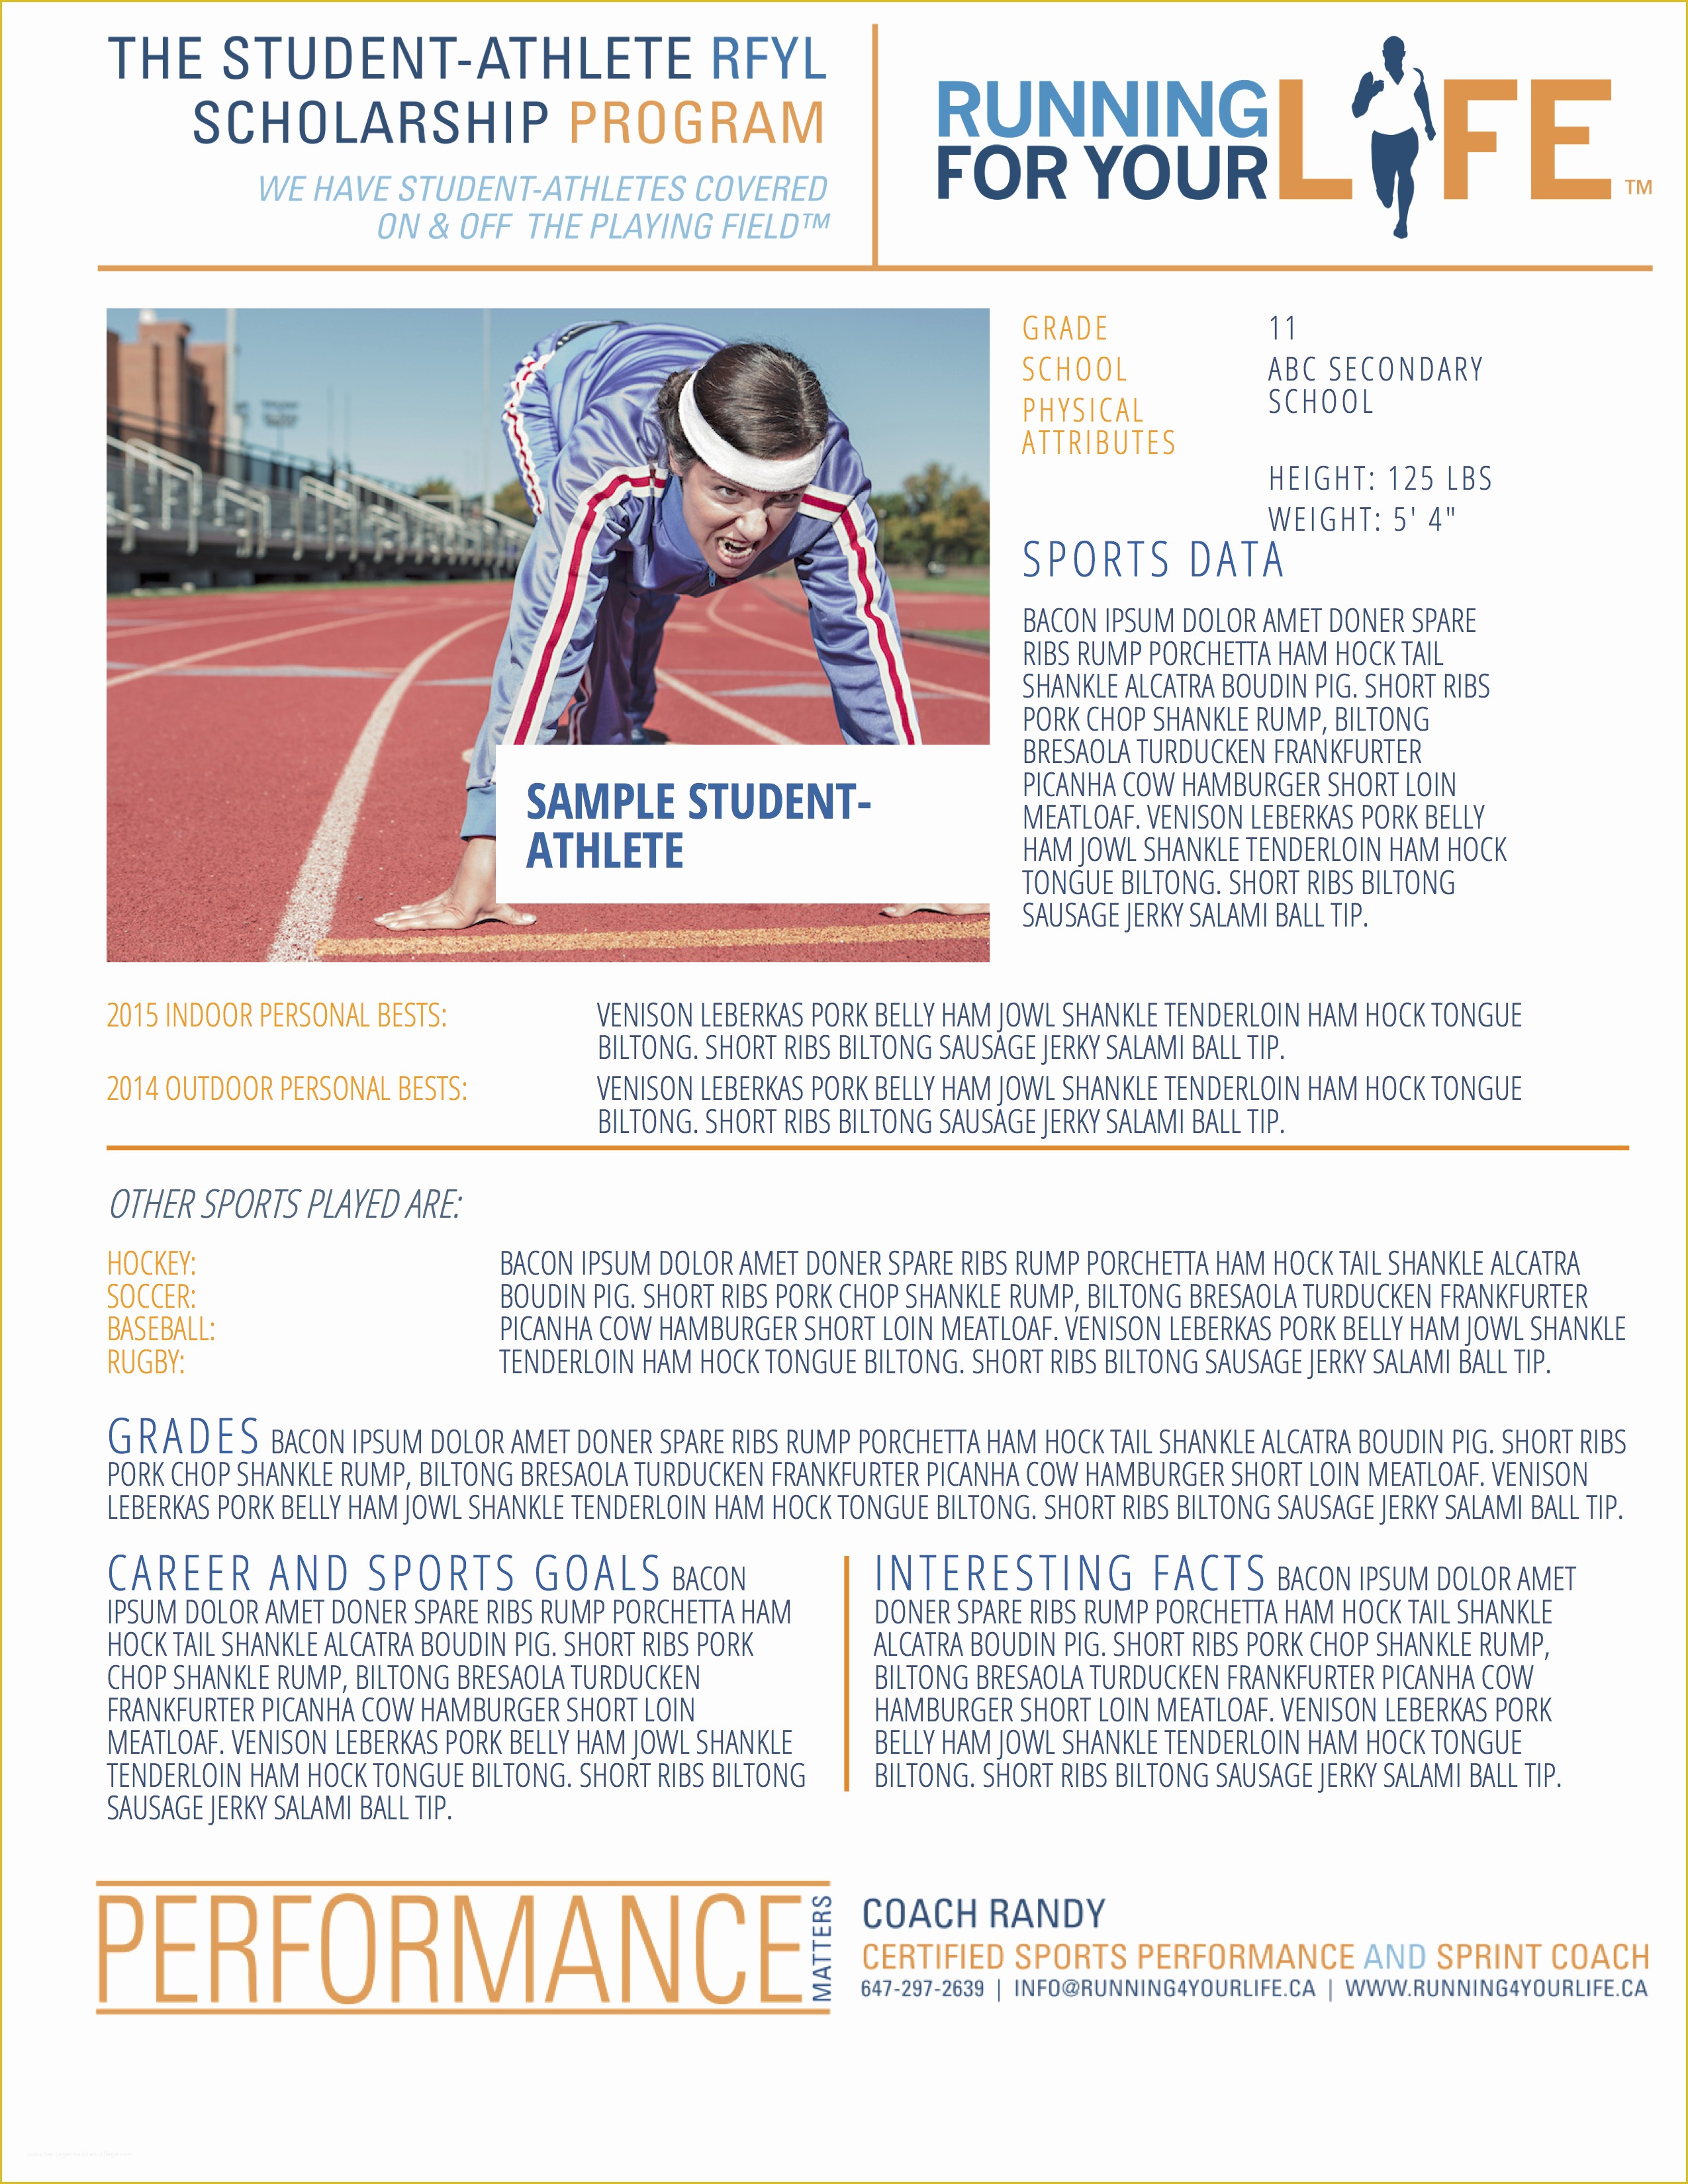 Athlete Profile Template Free Of Running for Your Life Student athlete Scholarship Program